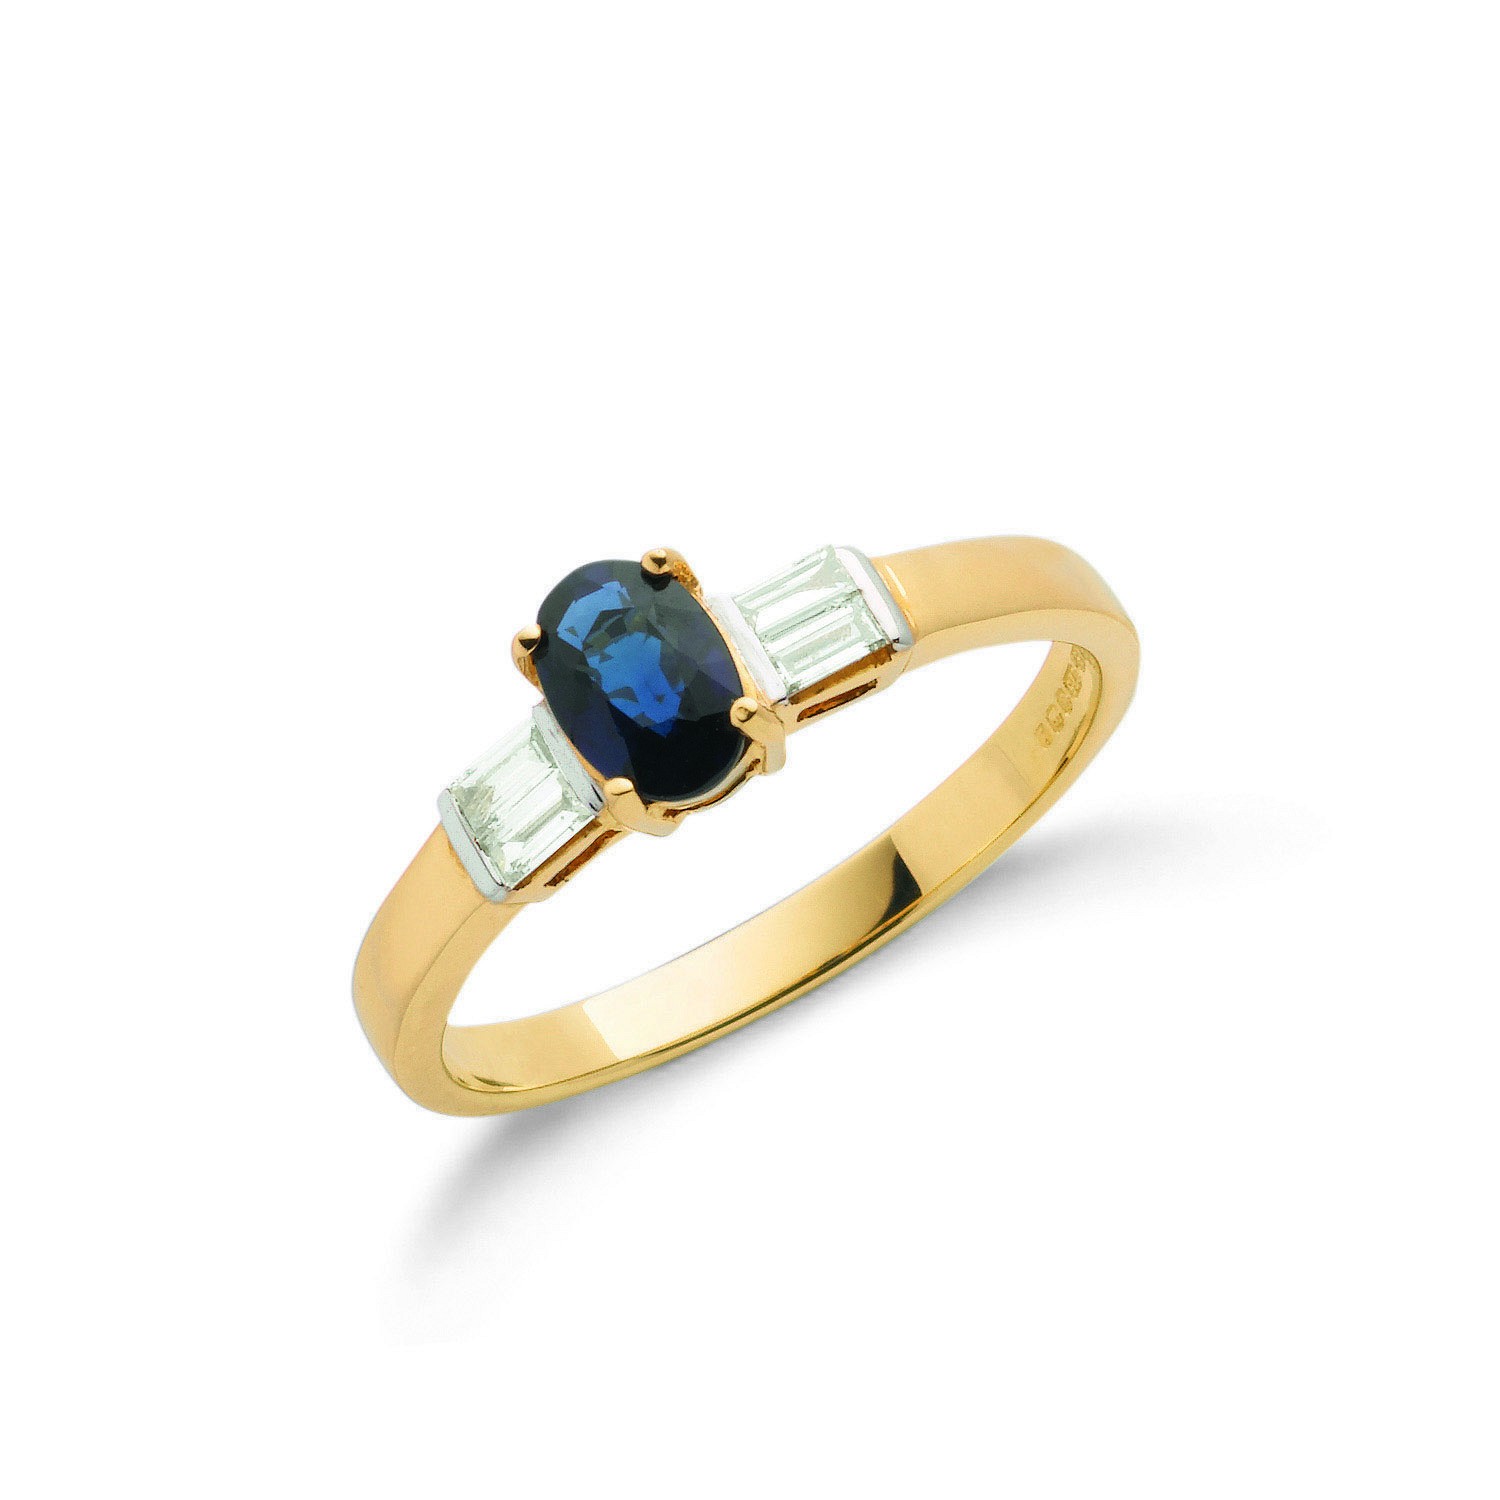 1.00 Carat Oval Shaped Sapphire ring